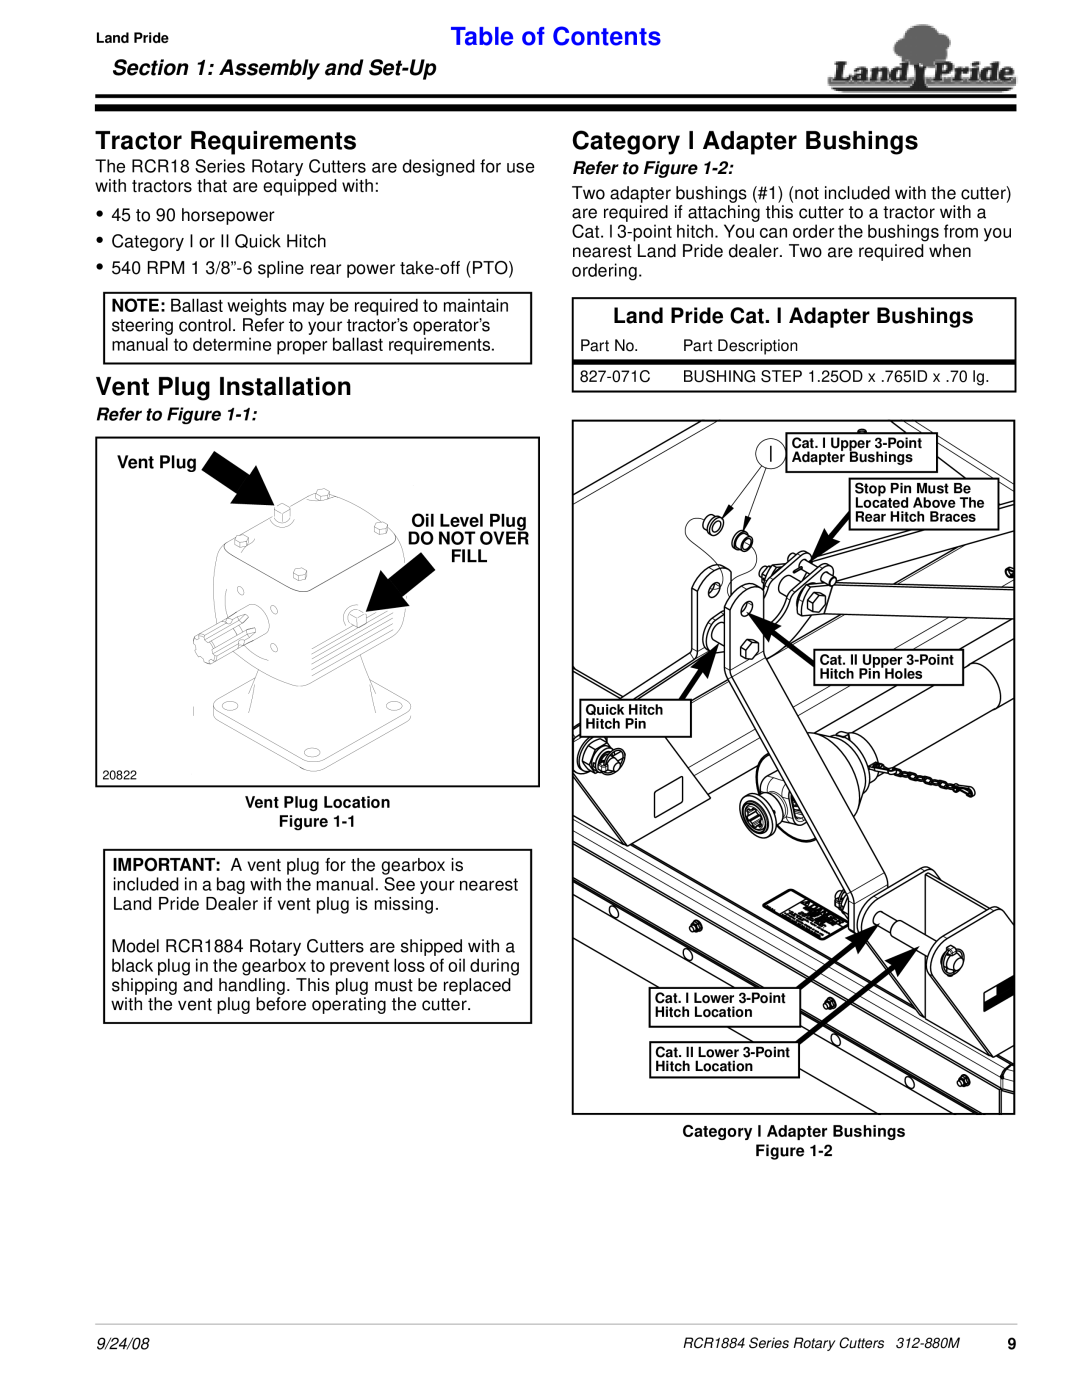 Land Pride RCR1884 manual Tractor Requirements, Vent Plug Installation, Category l Adapter Bushings, Table of Contents 